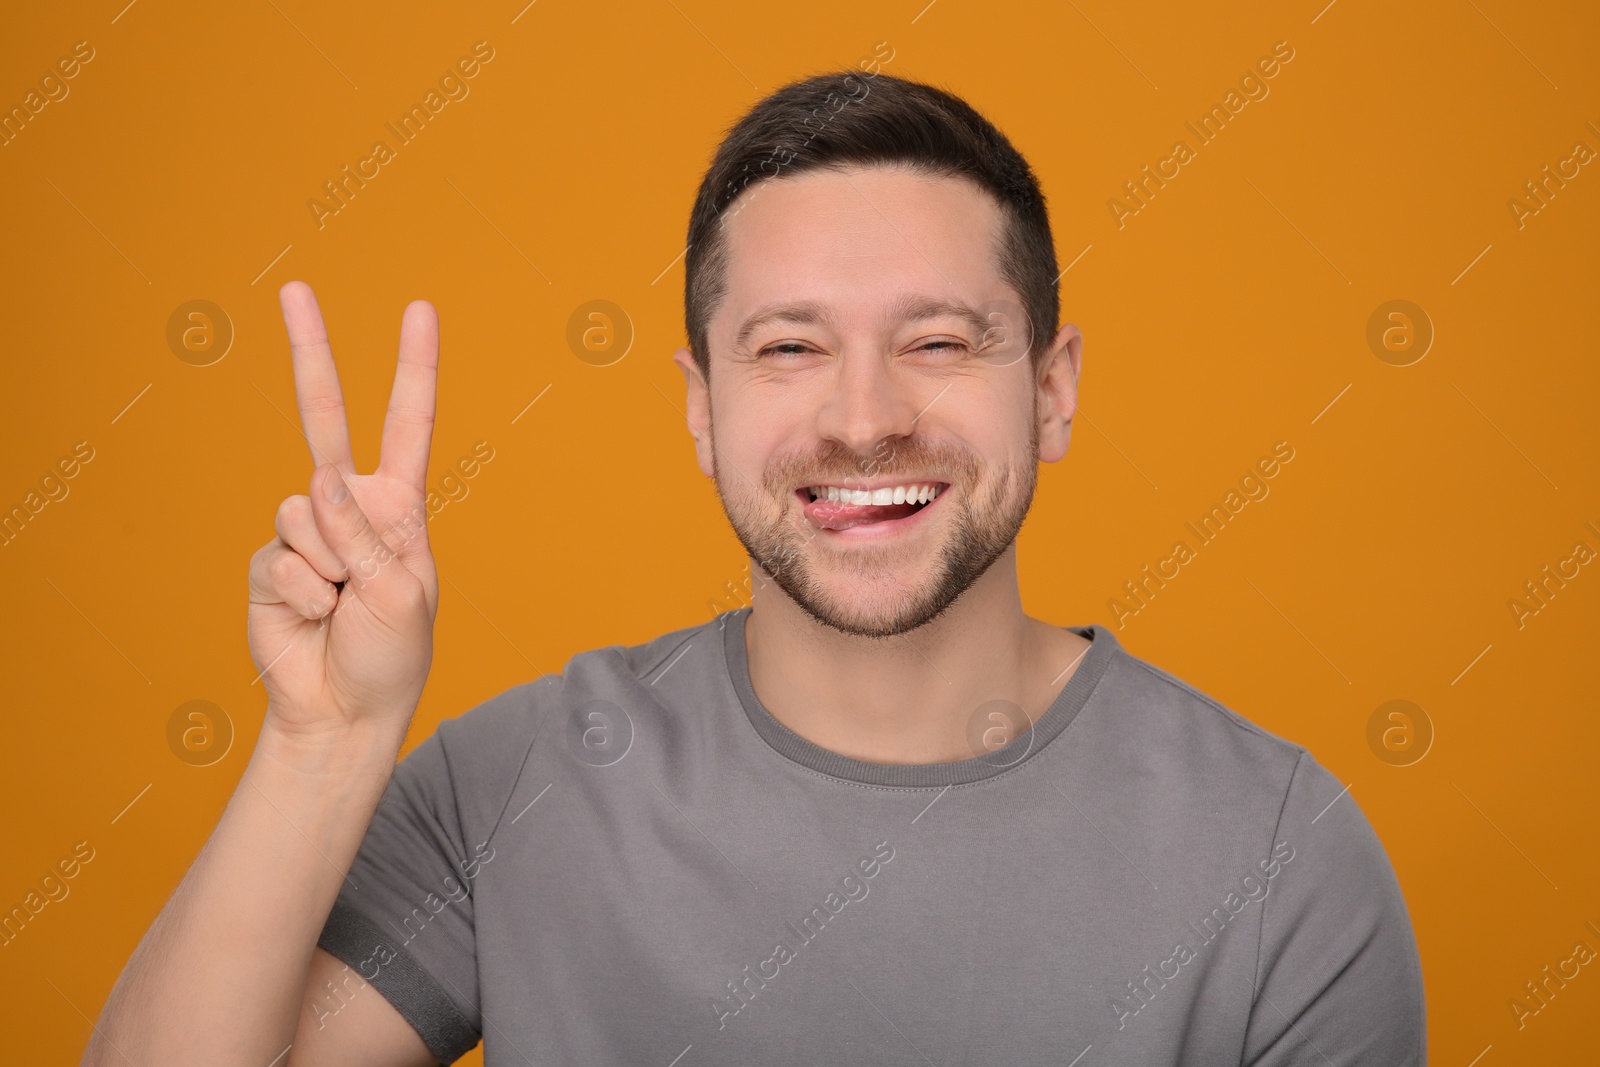 Photo of Happy man showing his tongue and V-sign on orange background